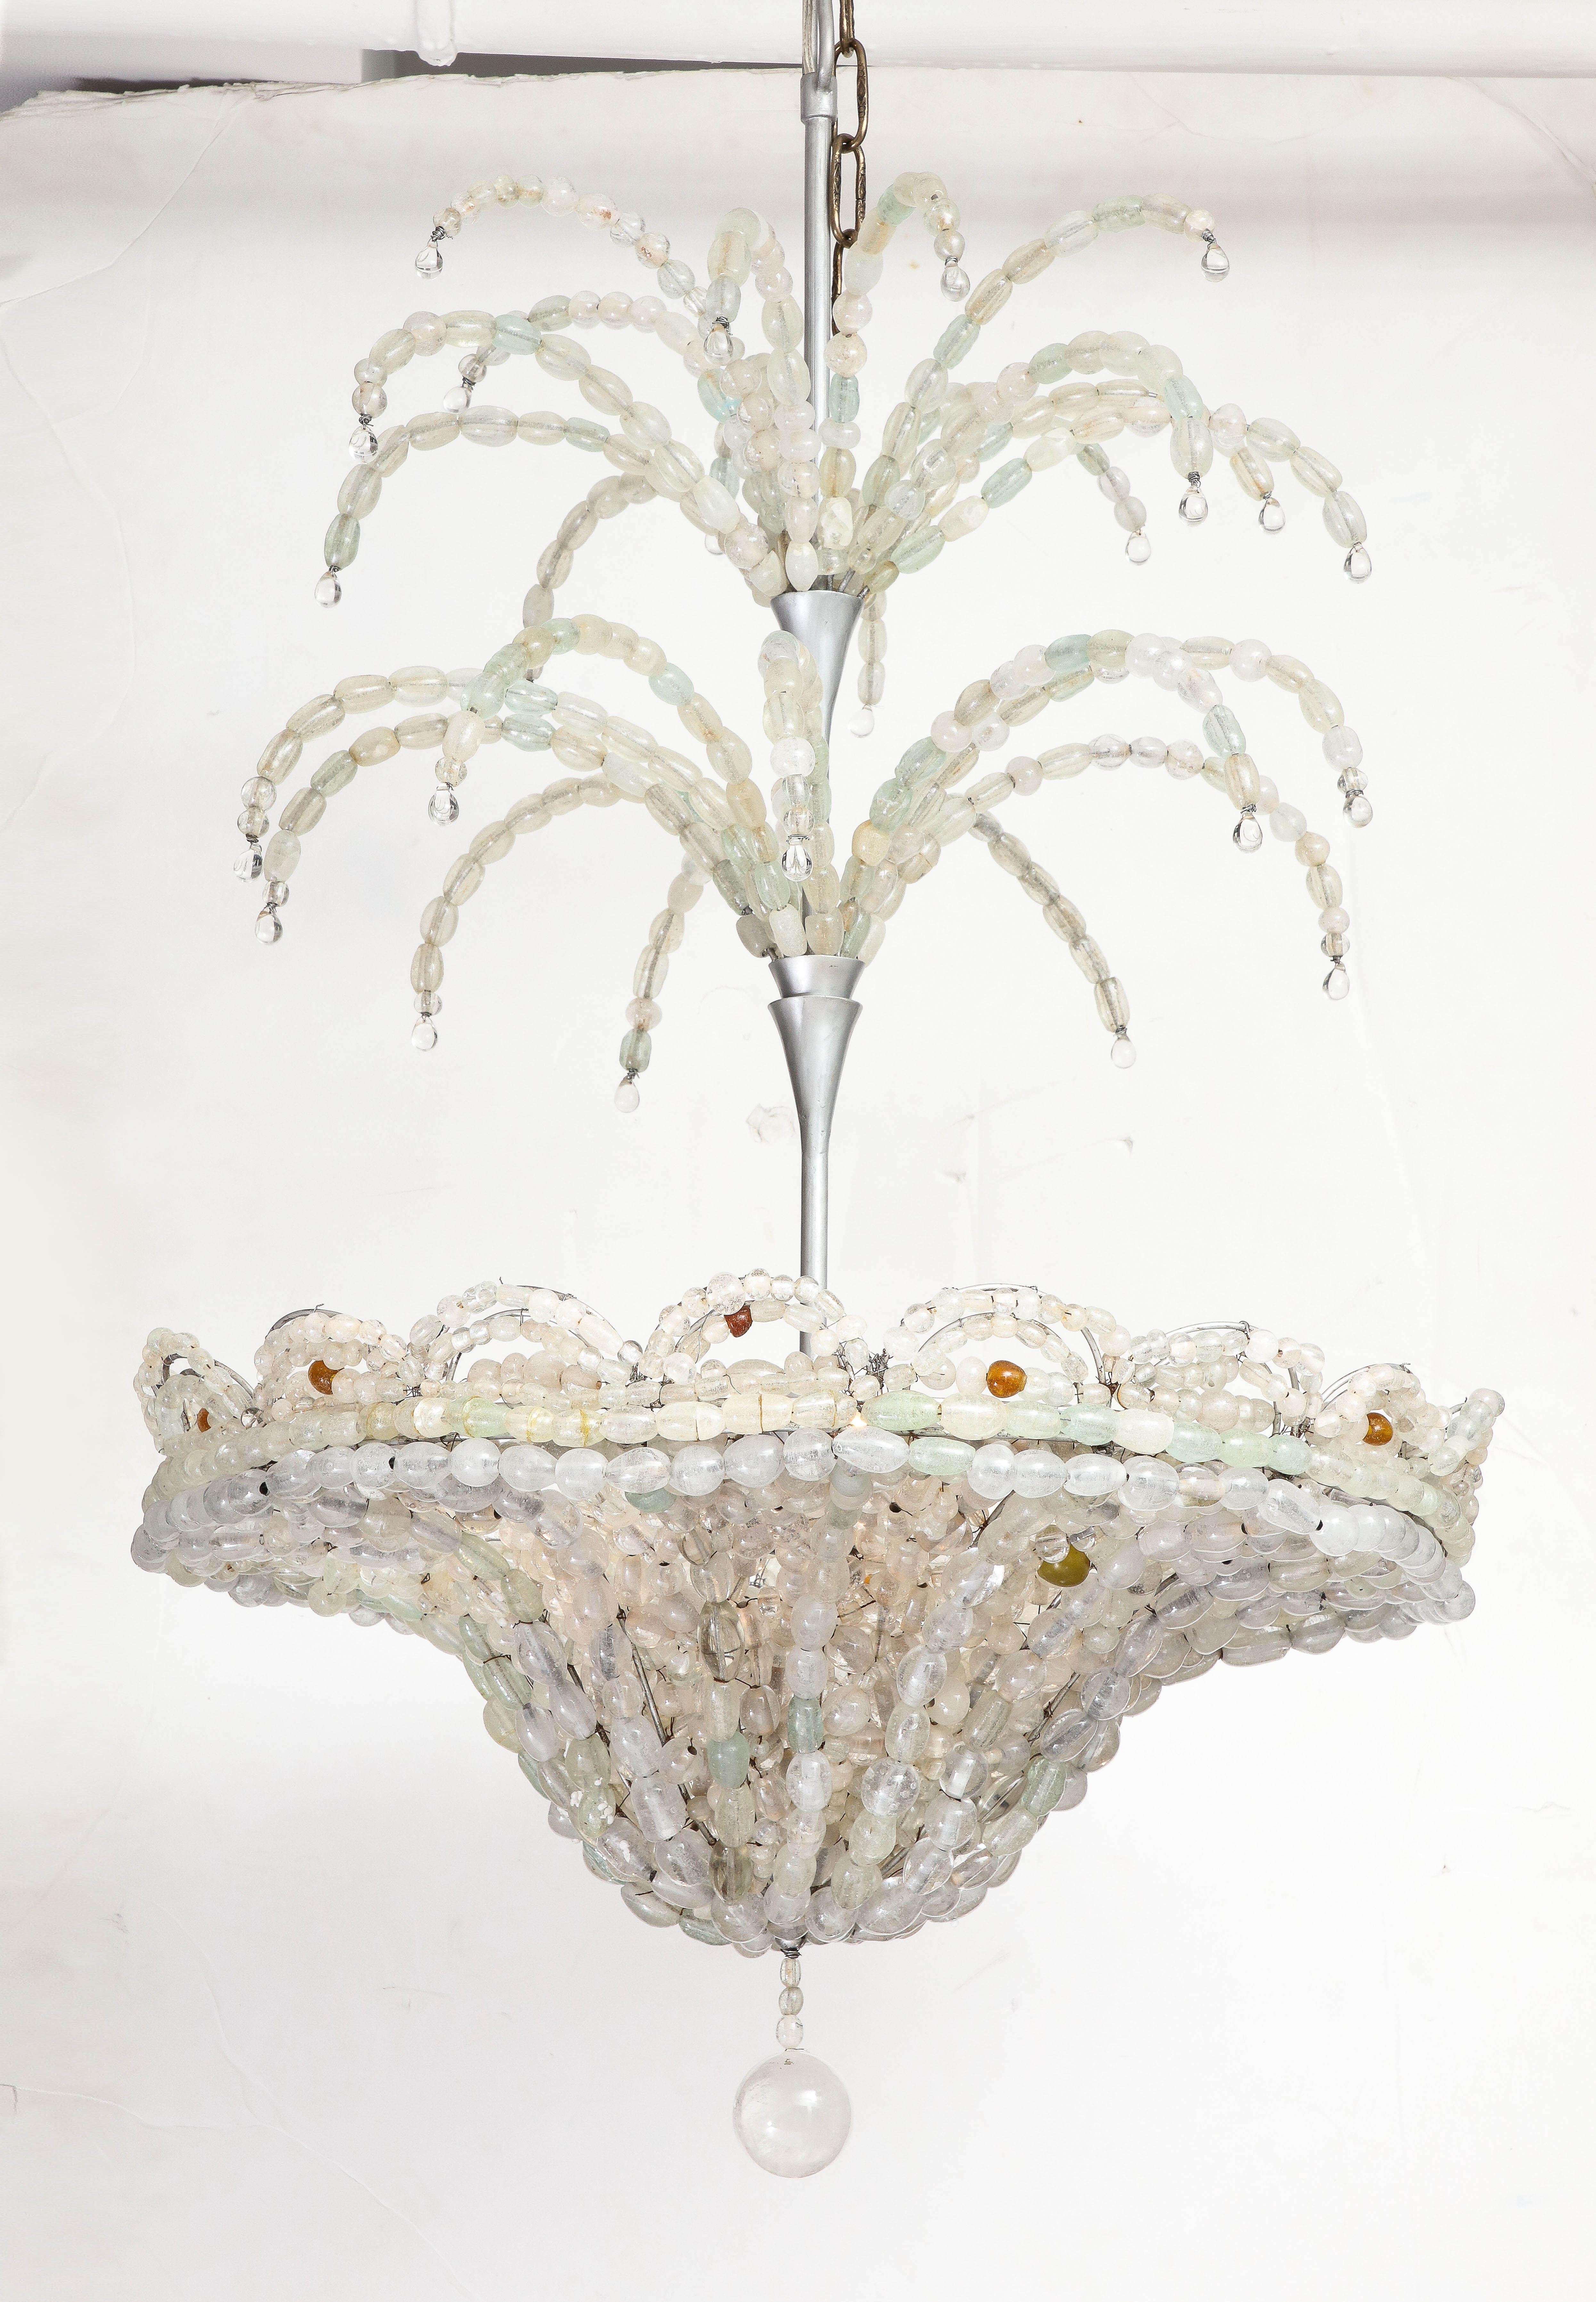 A rare and spectacular Art Deco chandelier comprised of a myriad of handblown beads strung together like pearls on a silver painted metal fountain form, the two tiers surmounting a scalloped edge beaded basket capped by a bottom ball. The